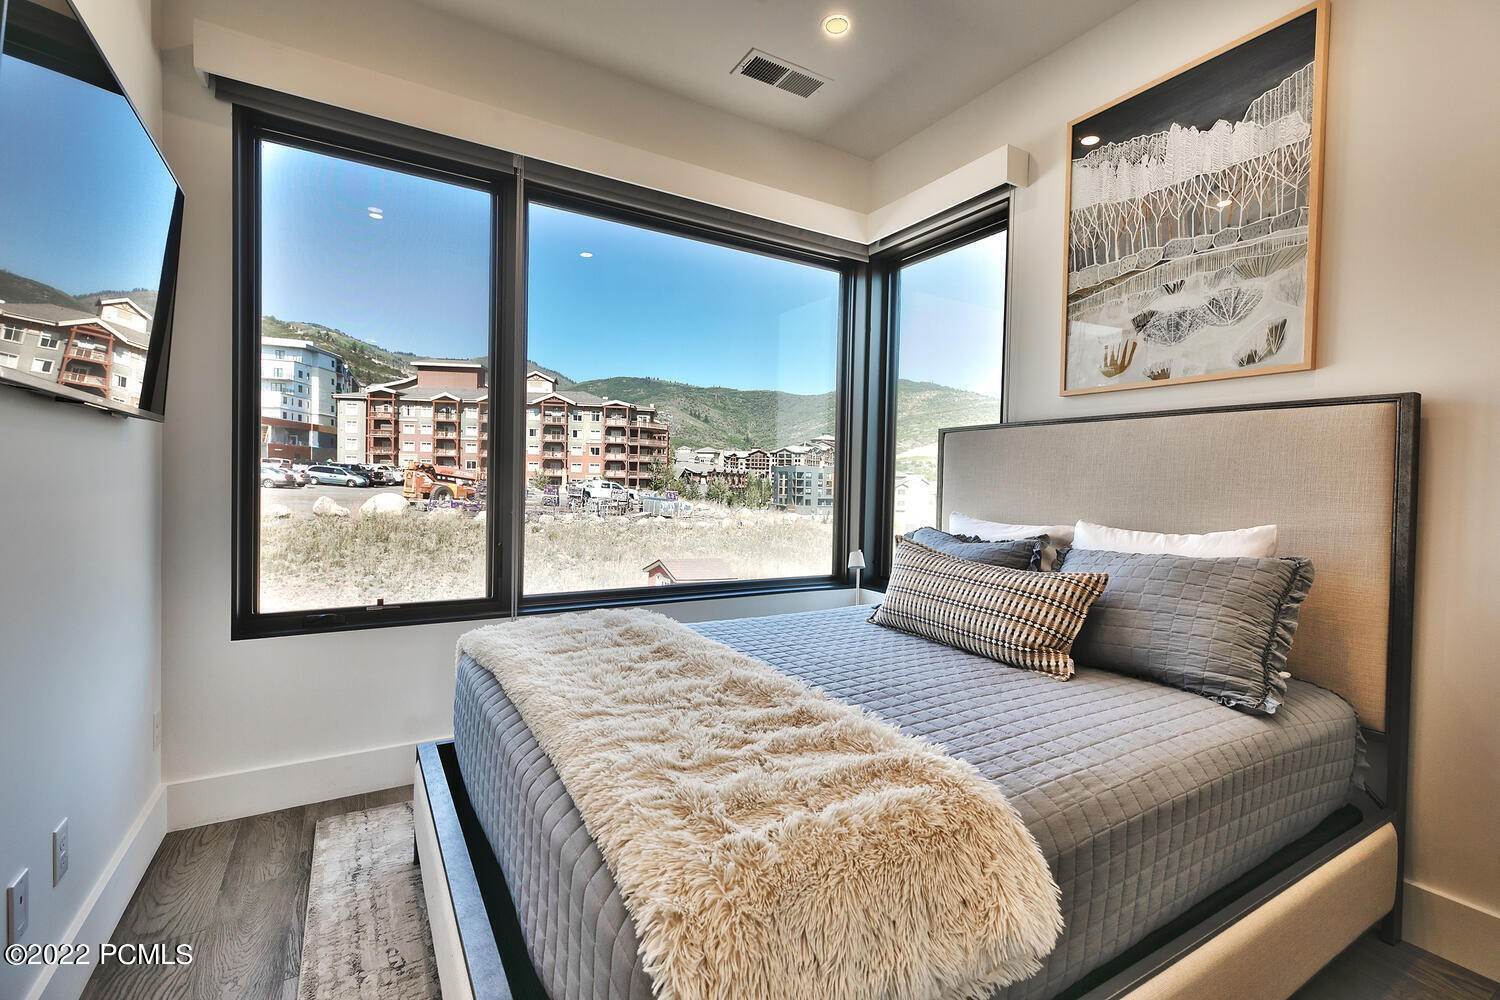 29. Fractional Ownership Property for Sale at 3599 Ridgeline Drive Park City, Utah 84060 United States